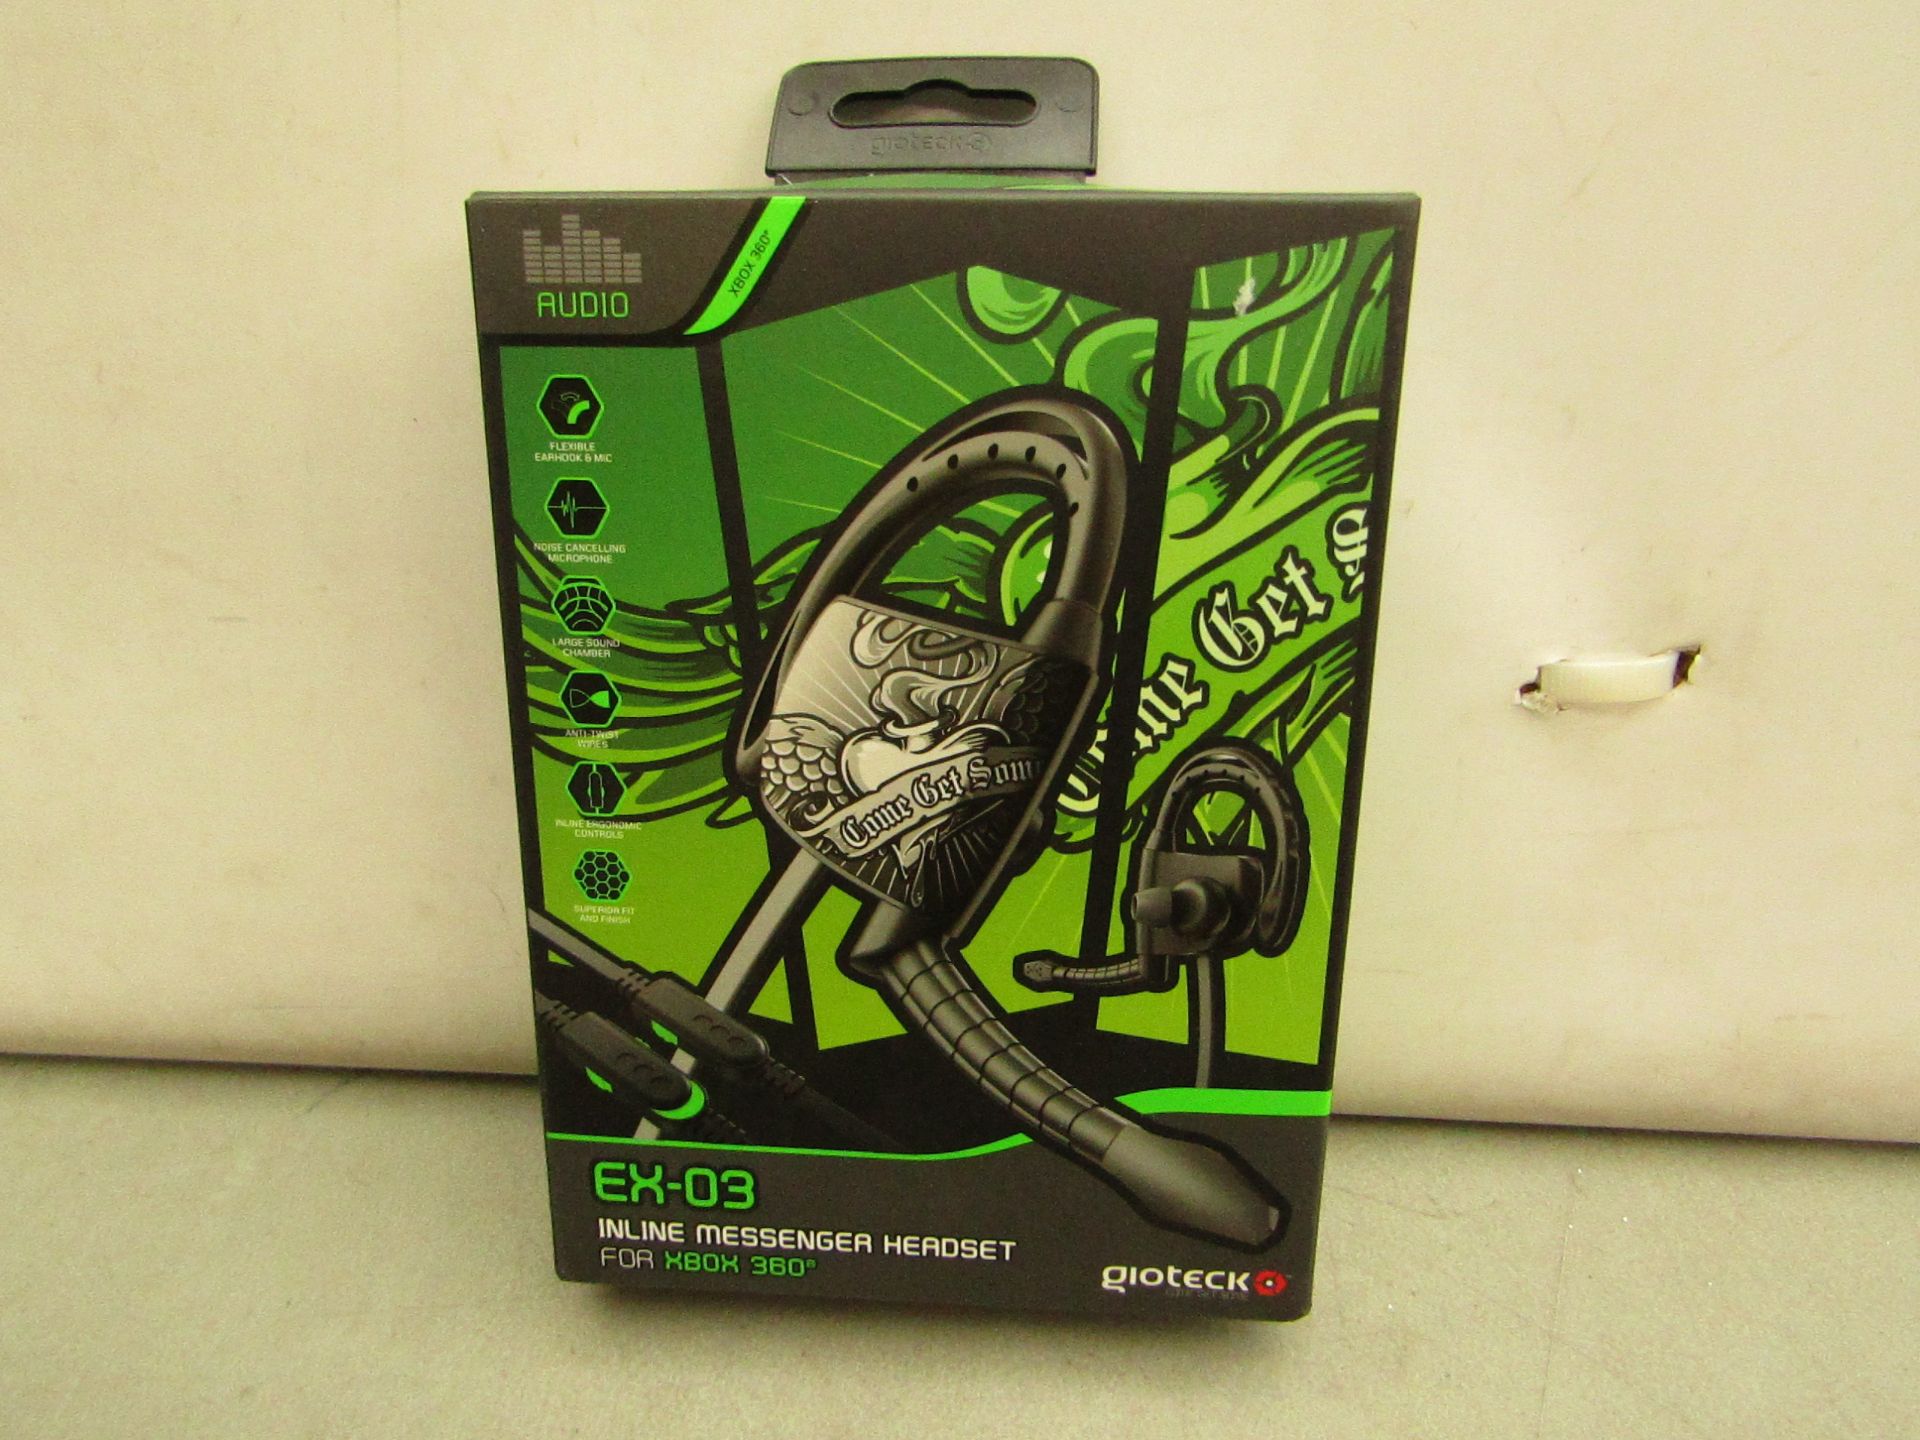 1 Box of 2 Gioteck - EX-03 Inline messenger headset (Xbox 360) All boxed.